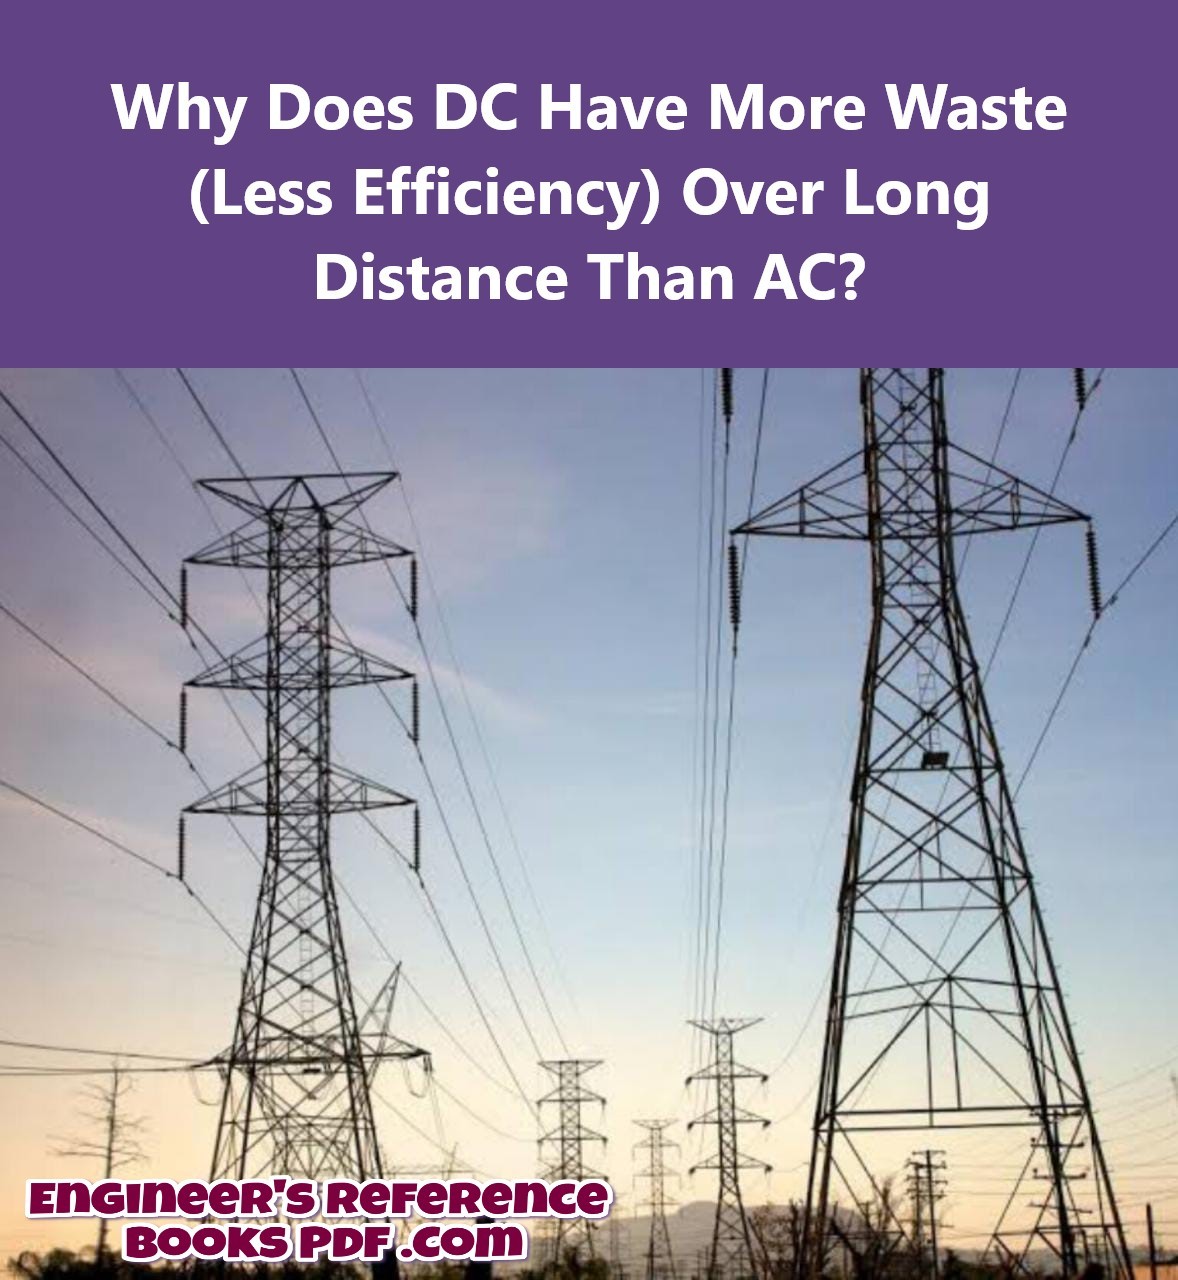 Why Does DC Have More Waste (Less Efficiency) Over Long Distance Than AC?